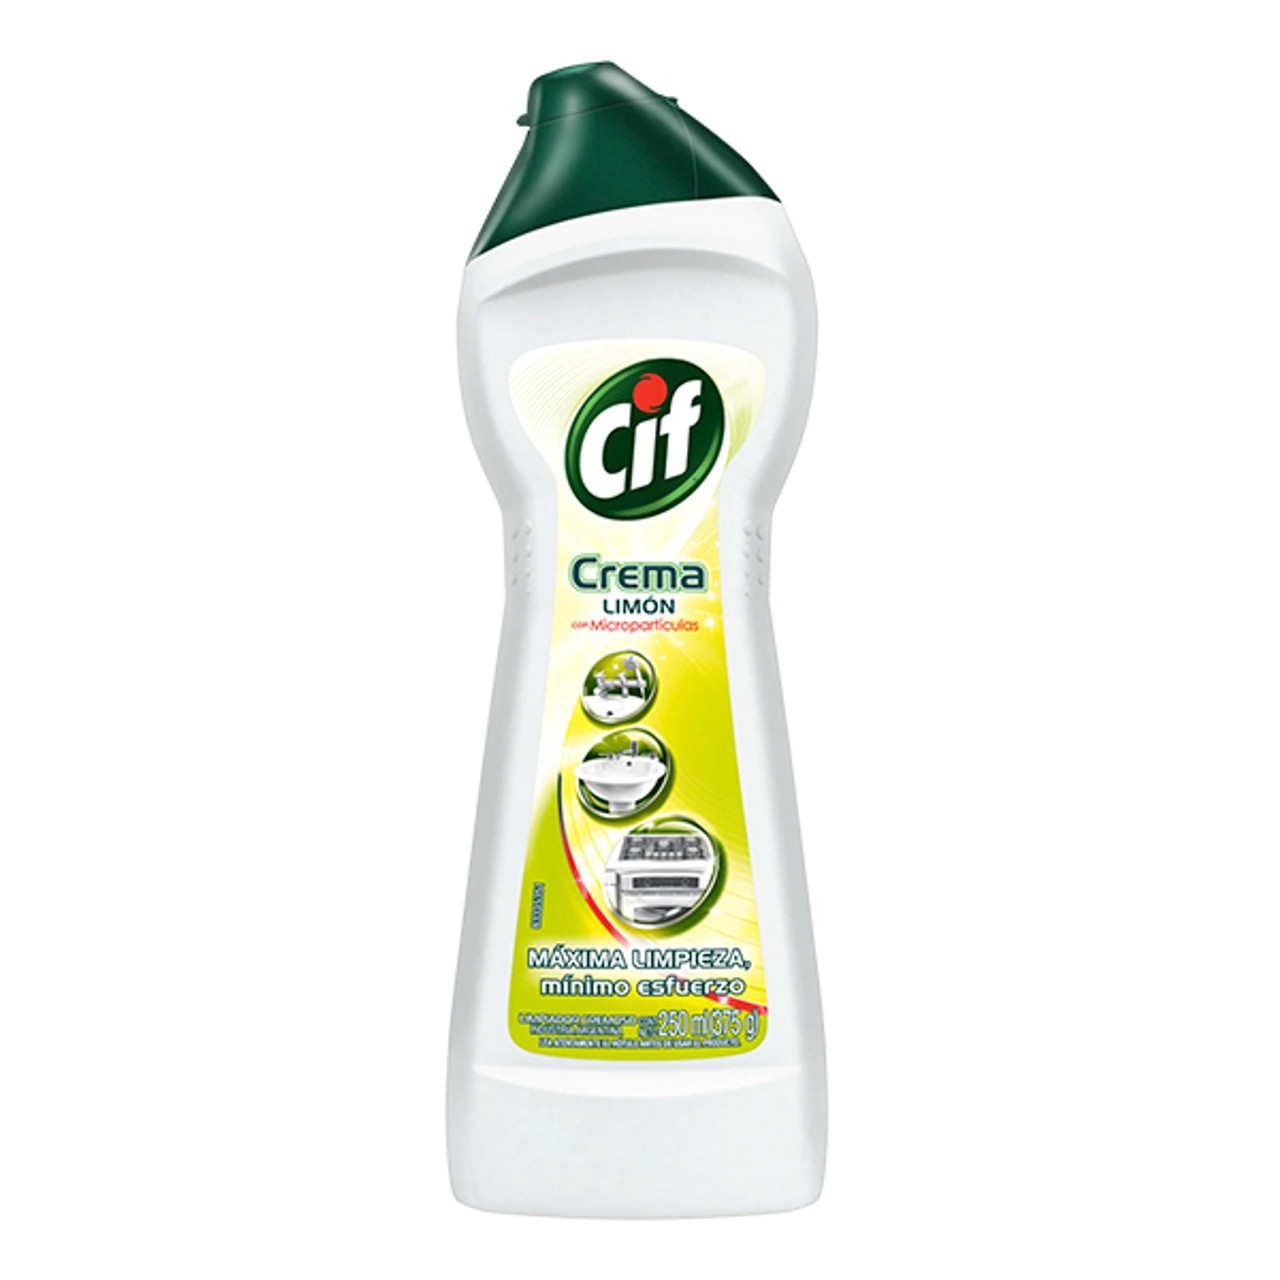 CIF Cream Lemon, Removing grease and dirt from surfaces makes cleaning  quick and easy! Made with millions of natural particles, CIF Cream keeps  your house sparkly clean.